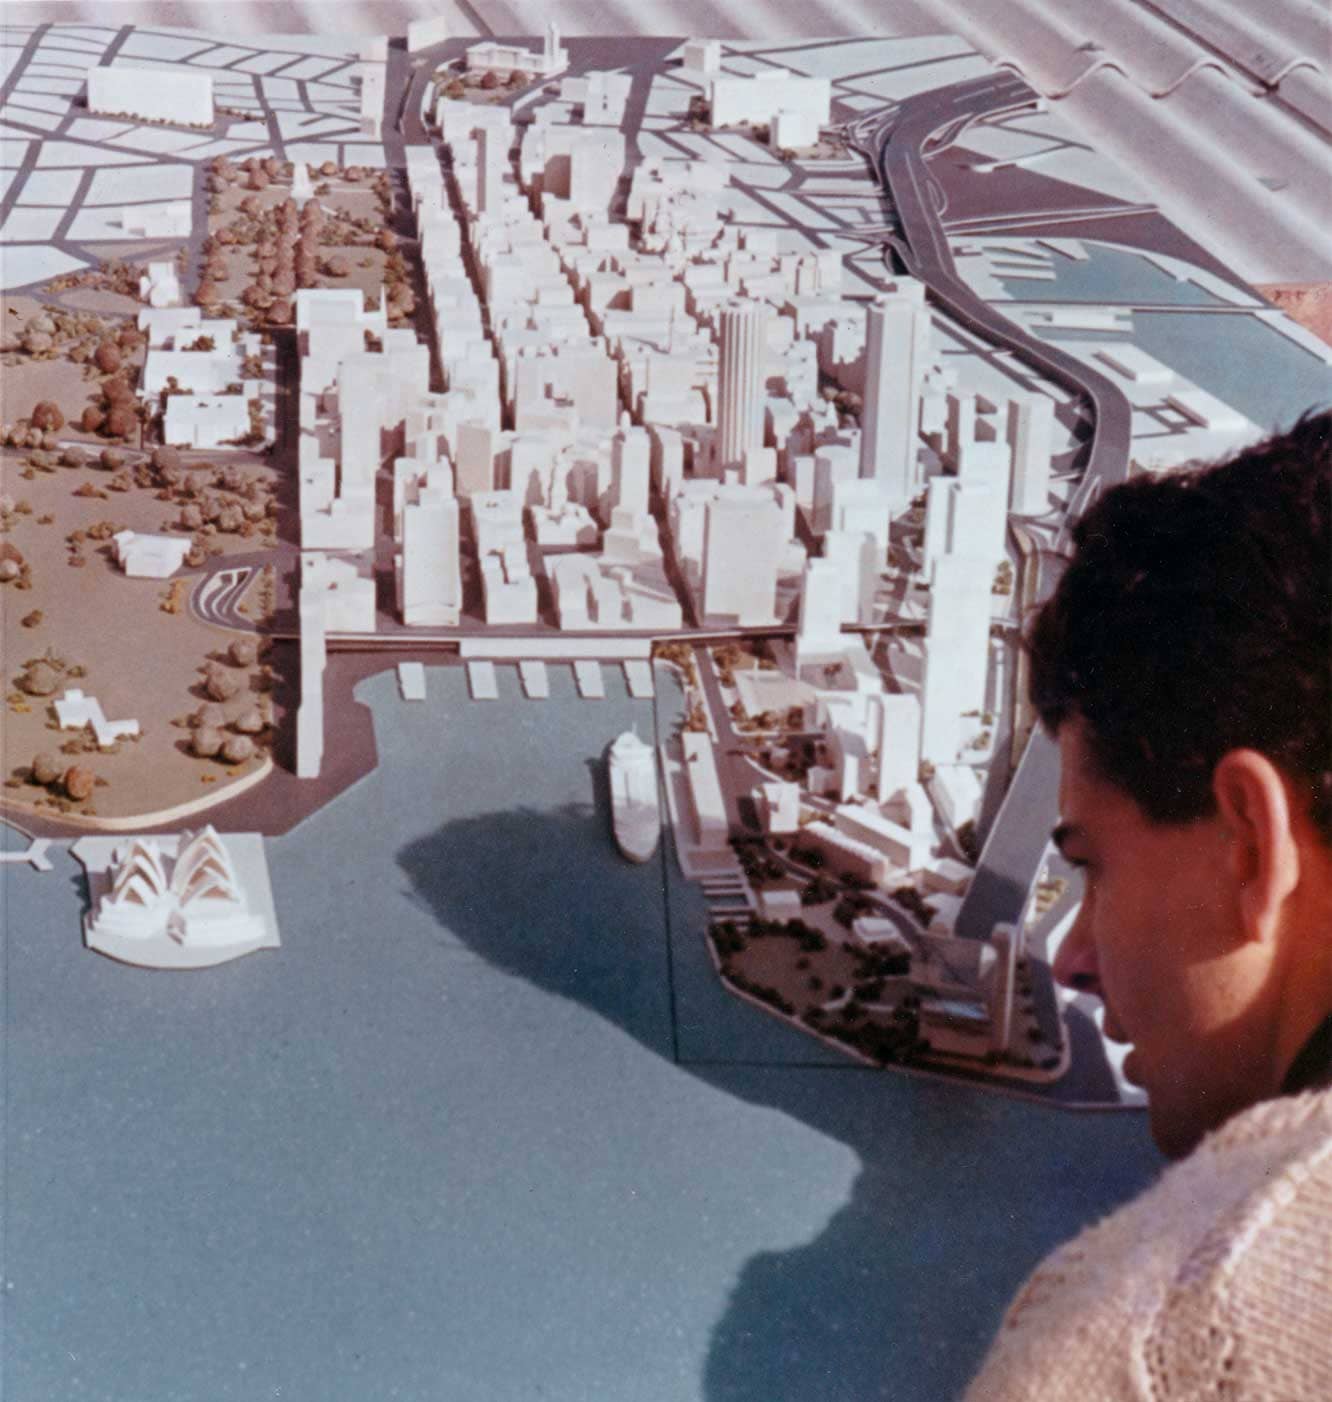 1967 model of the Sydney CBD featuring The Rocks proposed redevelopment